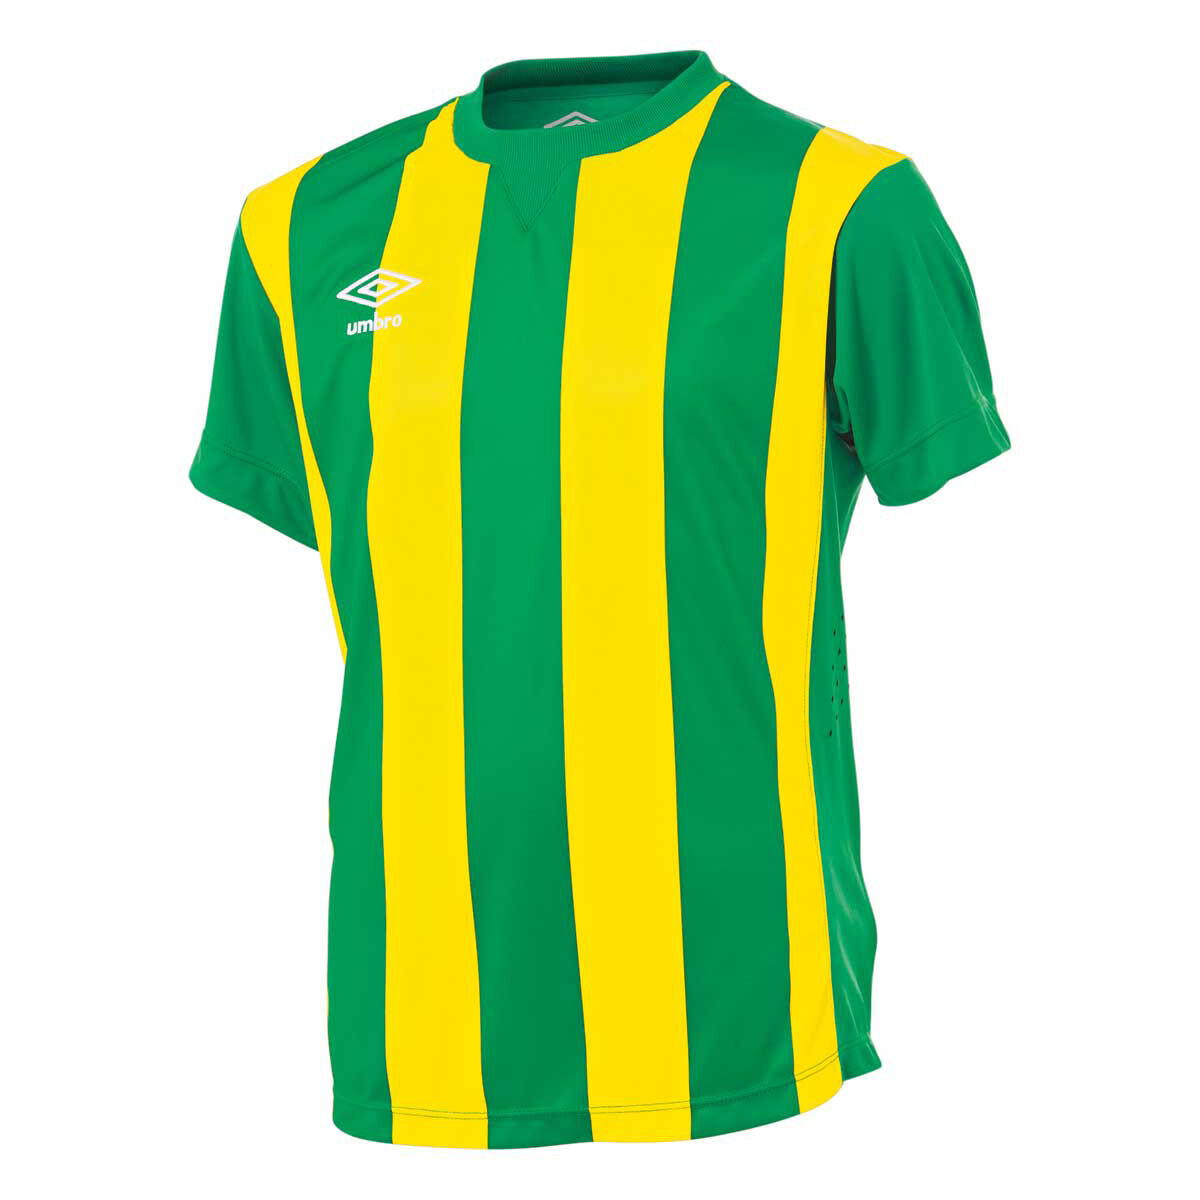 Umbro Kids Striped Jersey 7south Sport - roblox adias sports outfit code